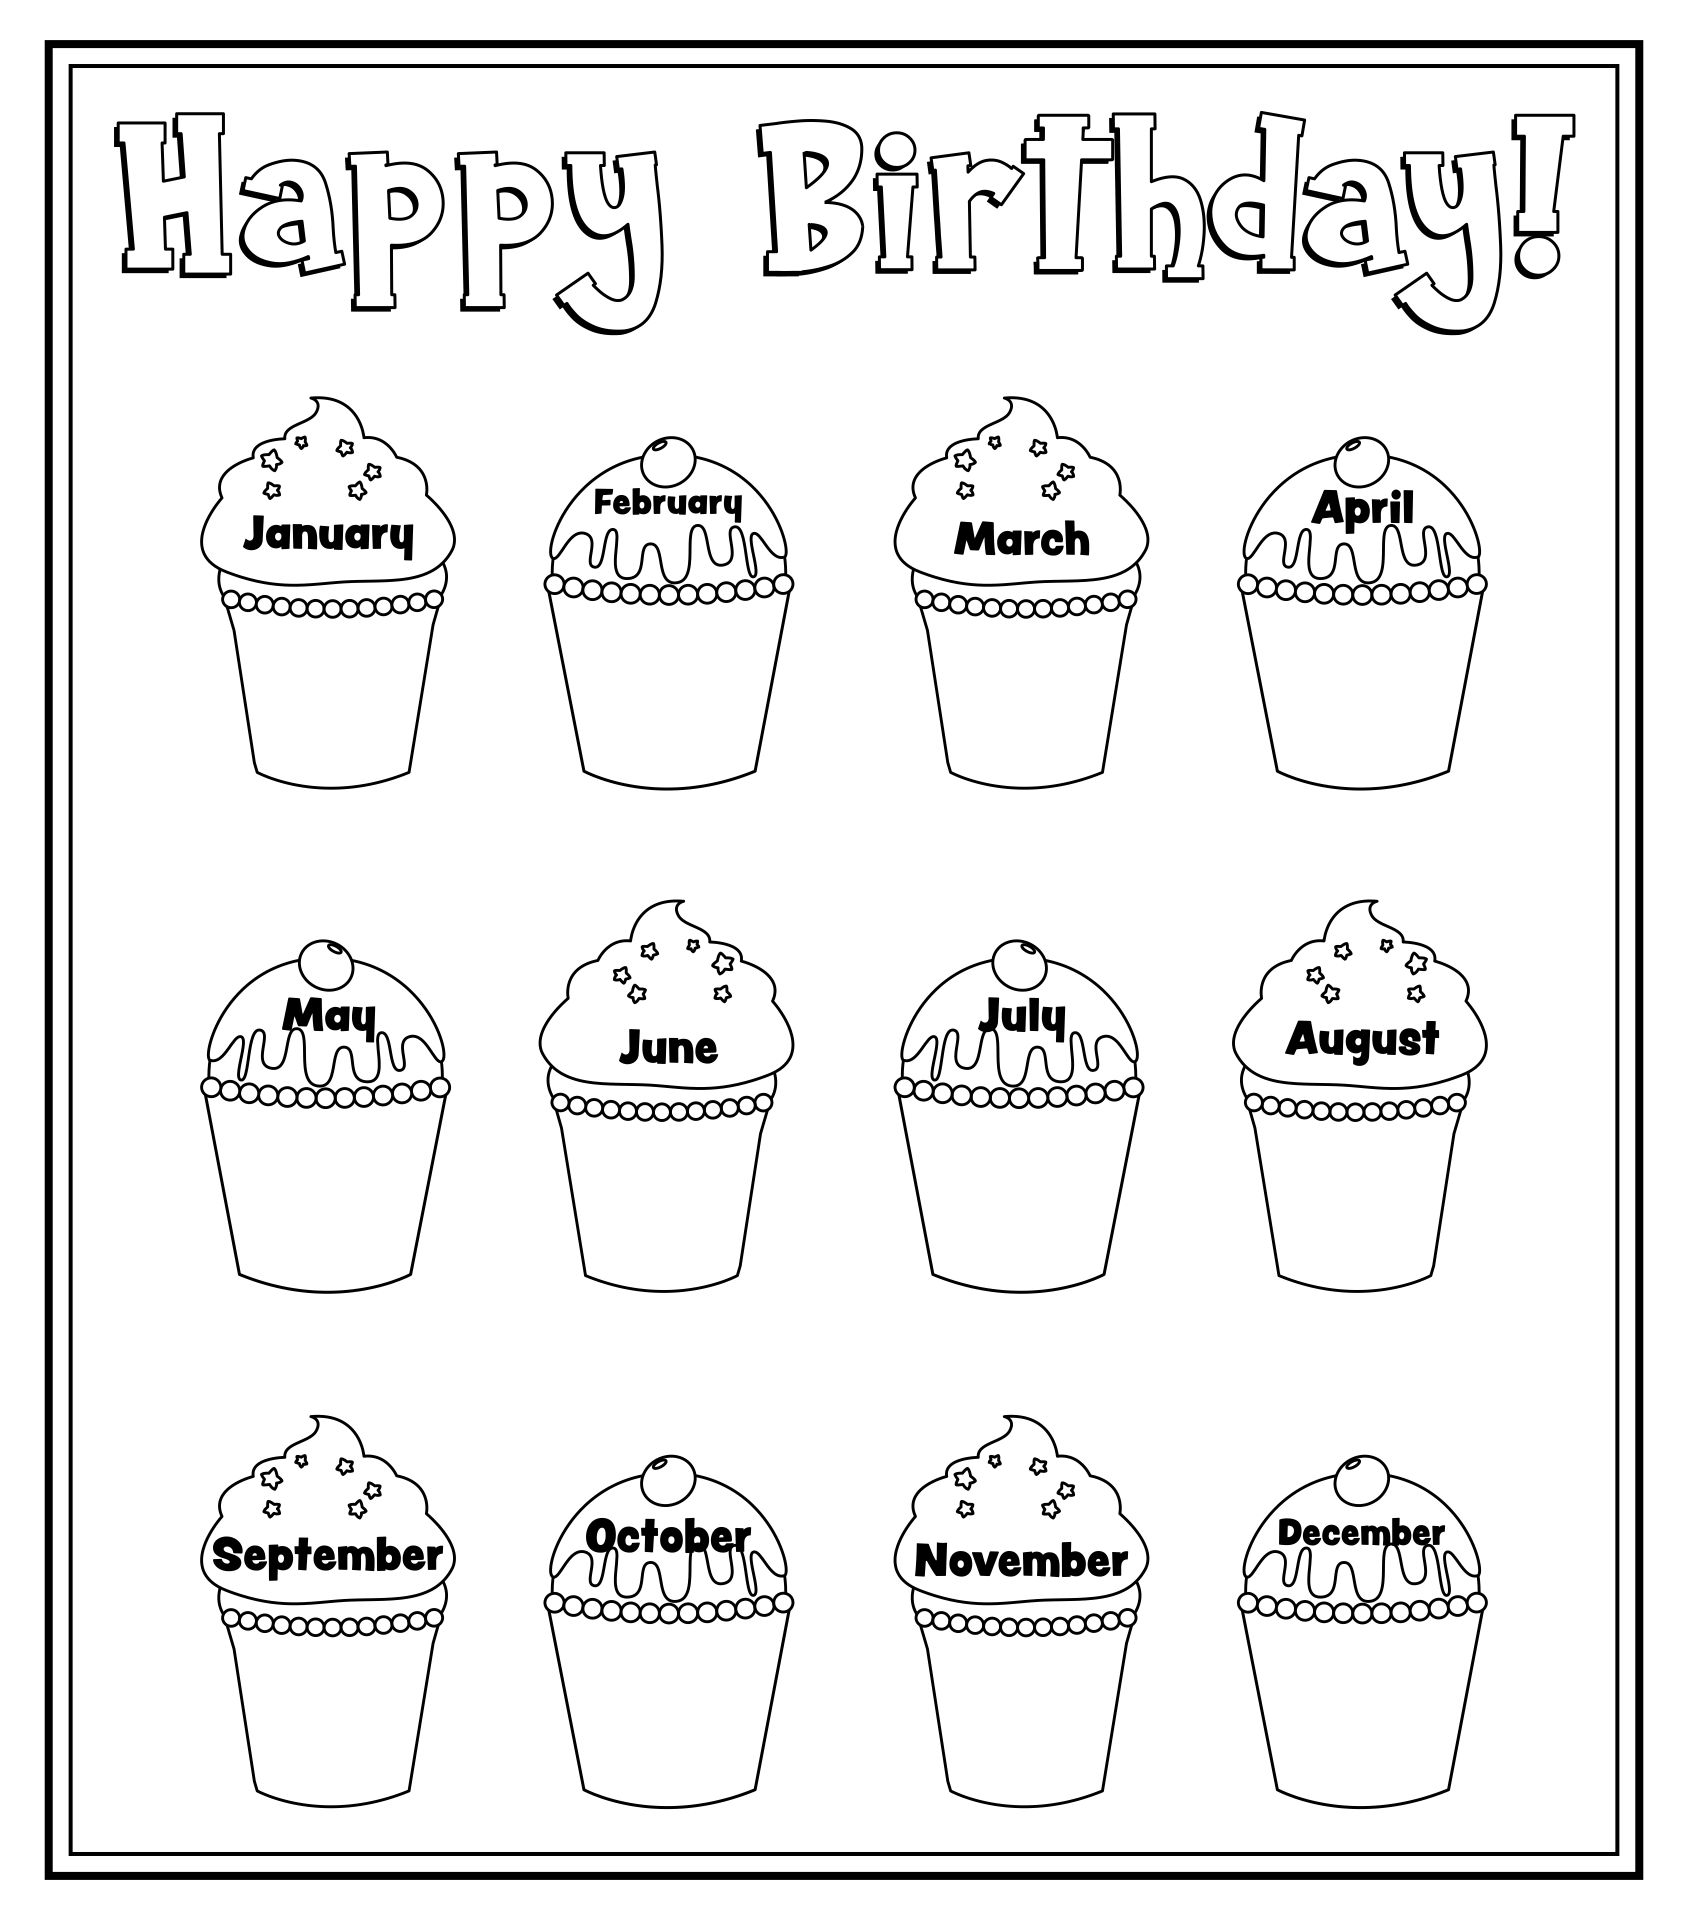 5 Best Images of Printable Birthday Cupcake Outlines Black and White